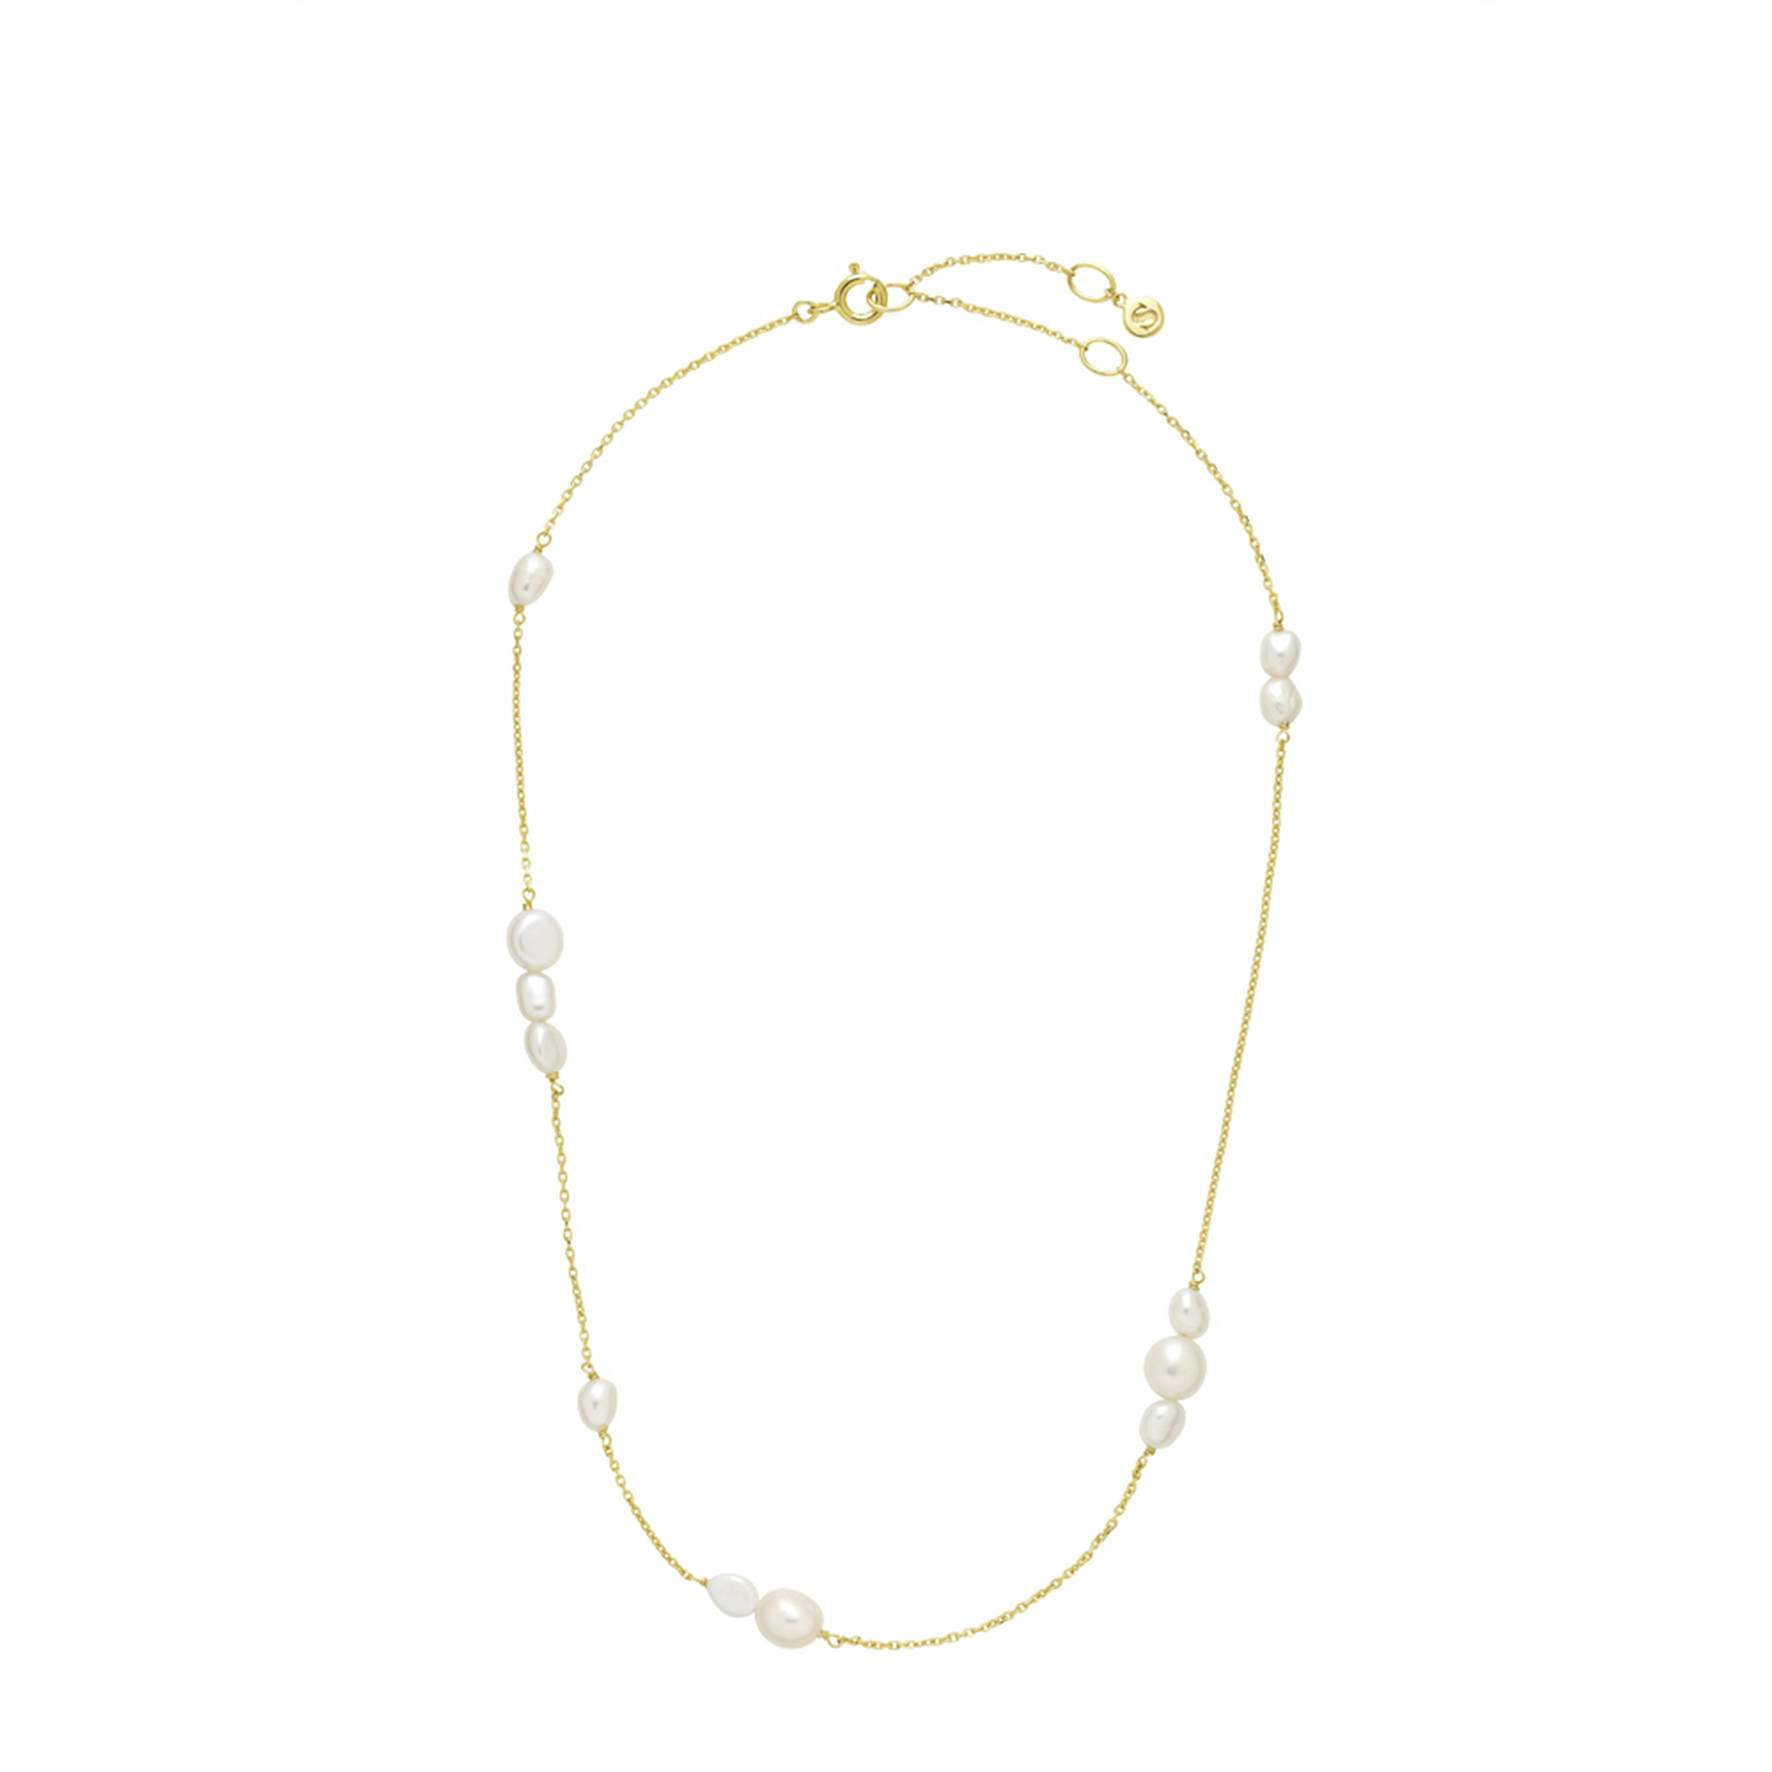 Ella by Sistie Necklace from Sistie in Goldplated-Silver Sterling 925